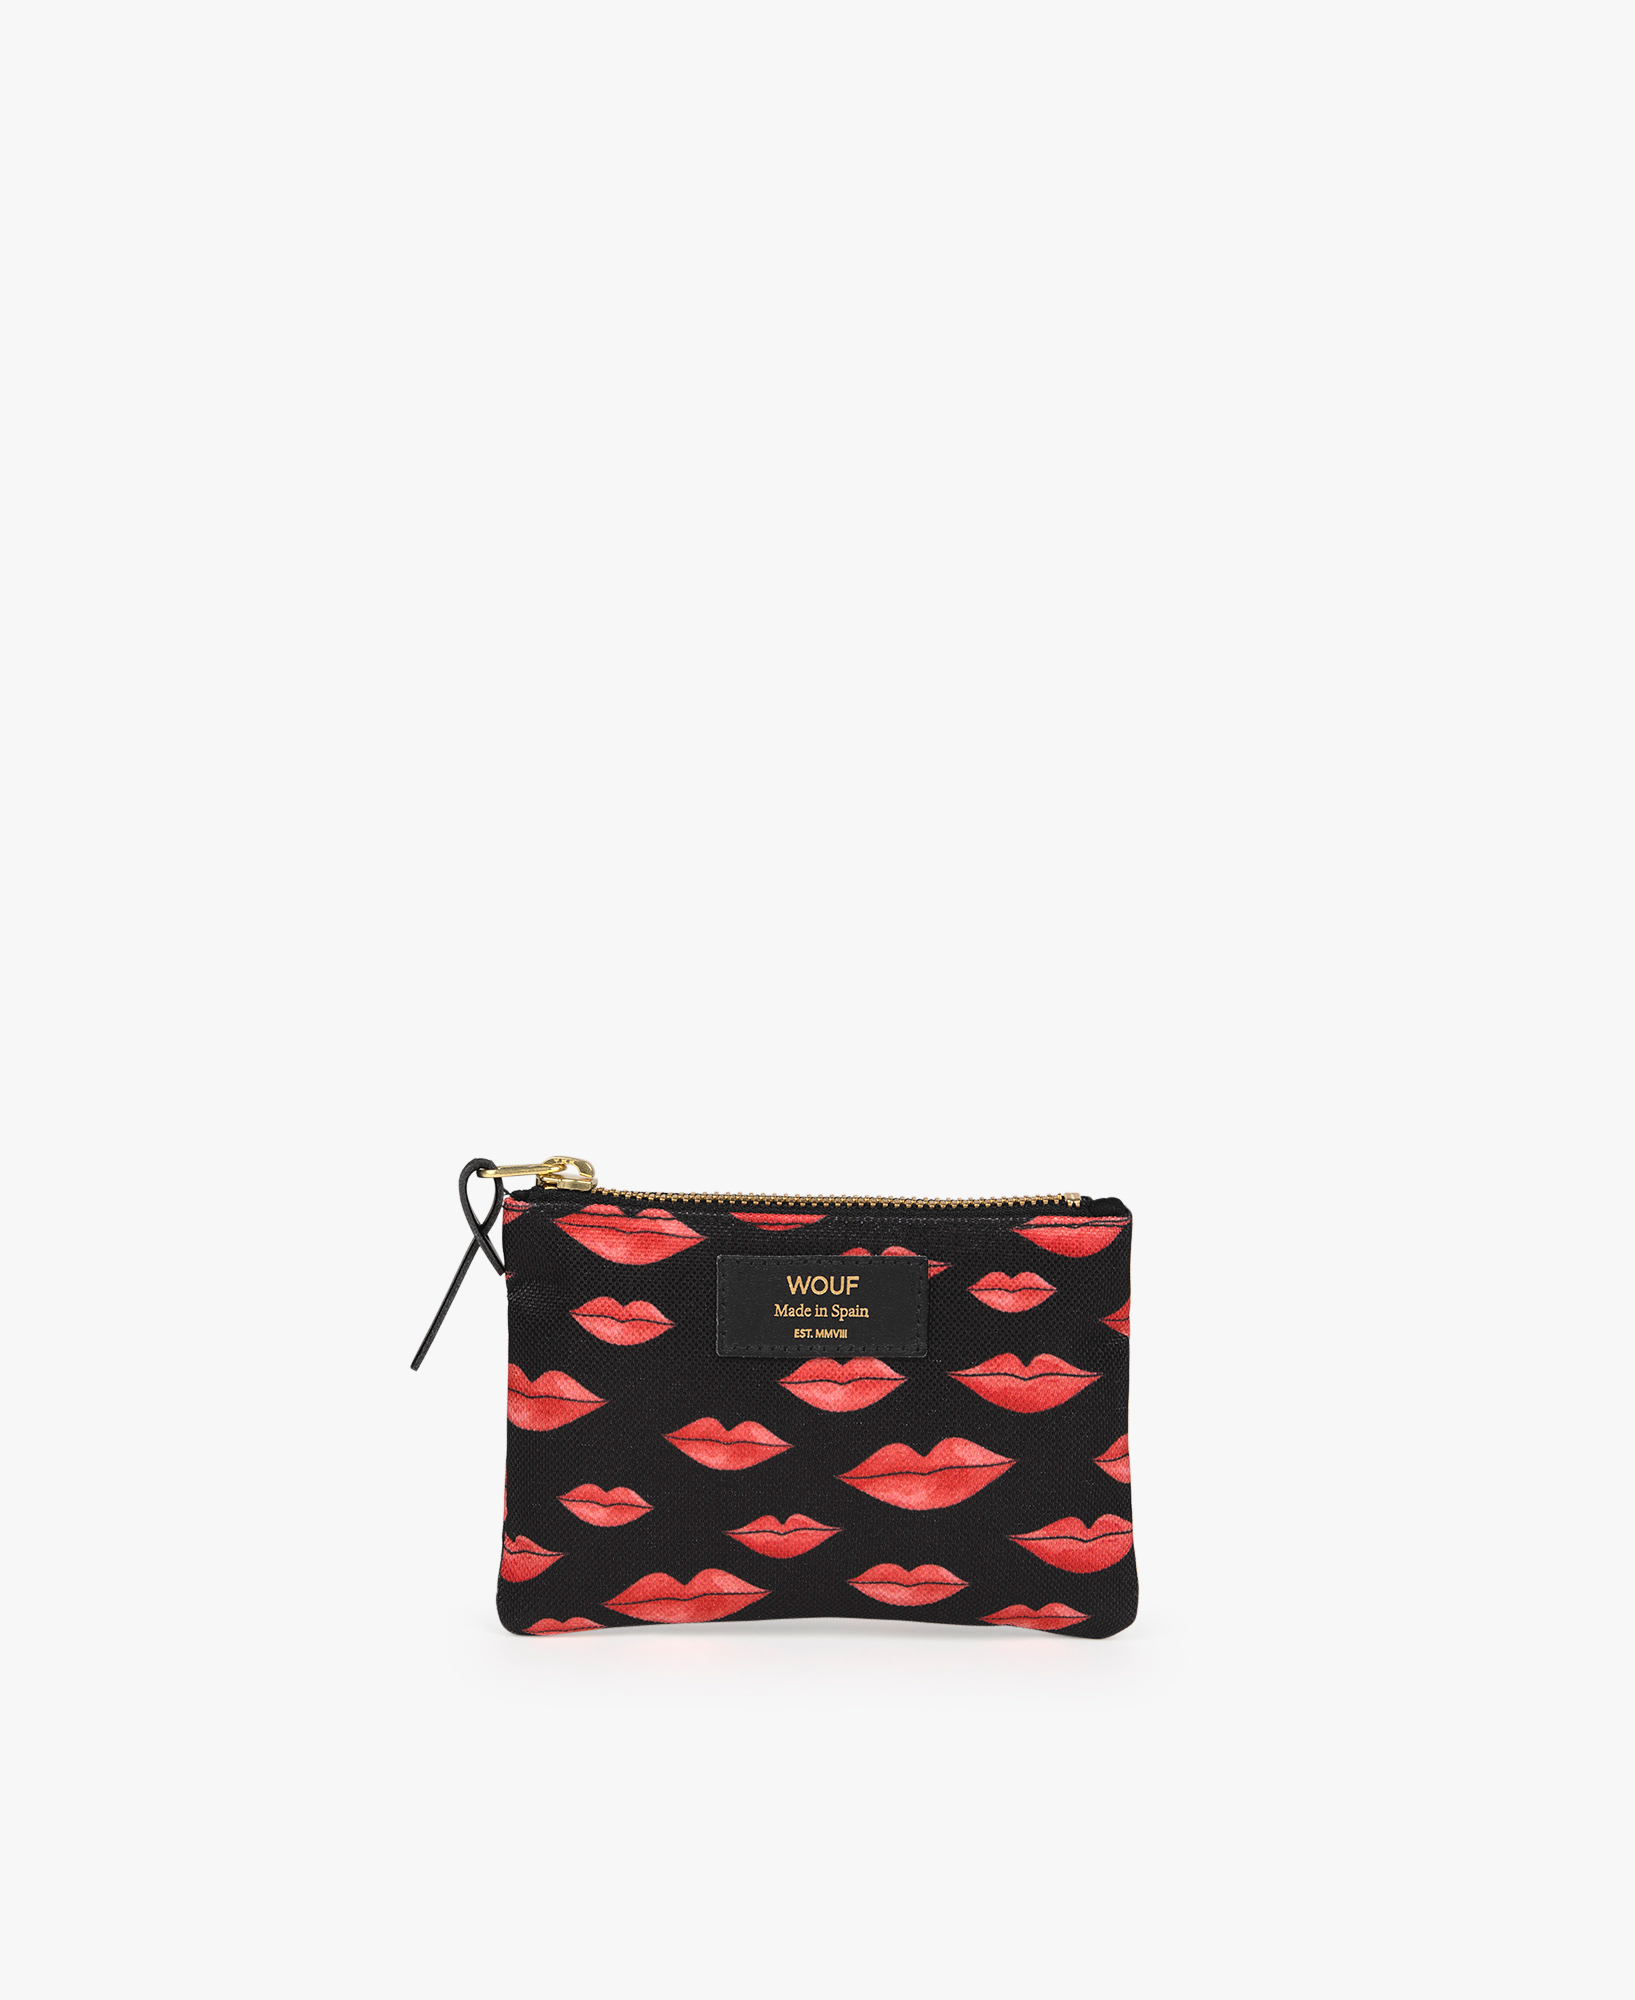 WOUF-Small-Pouch-Beso-Front